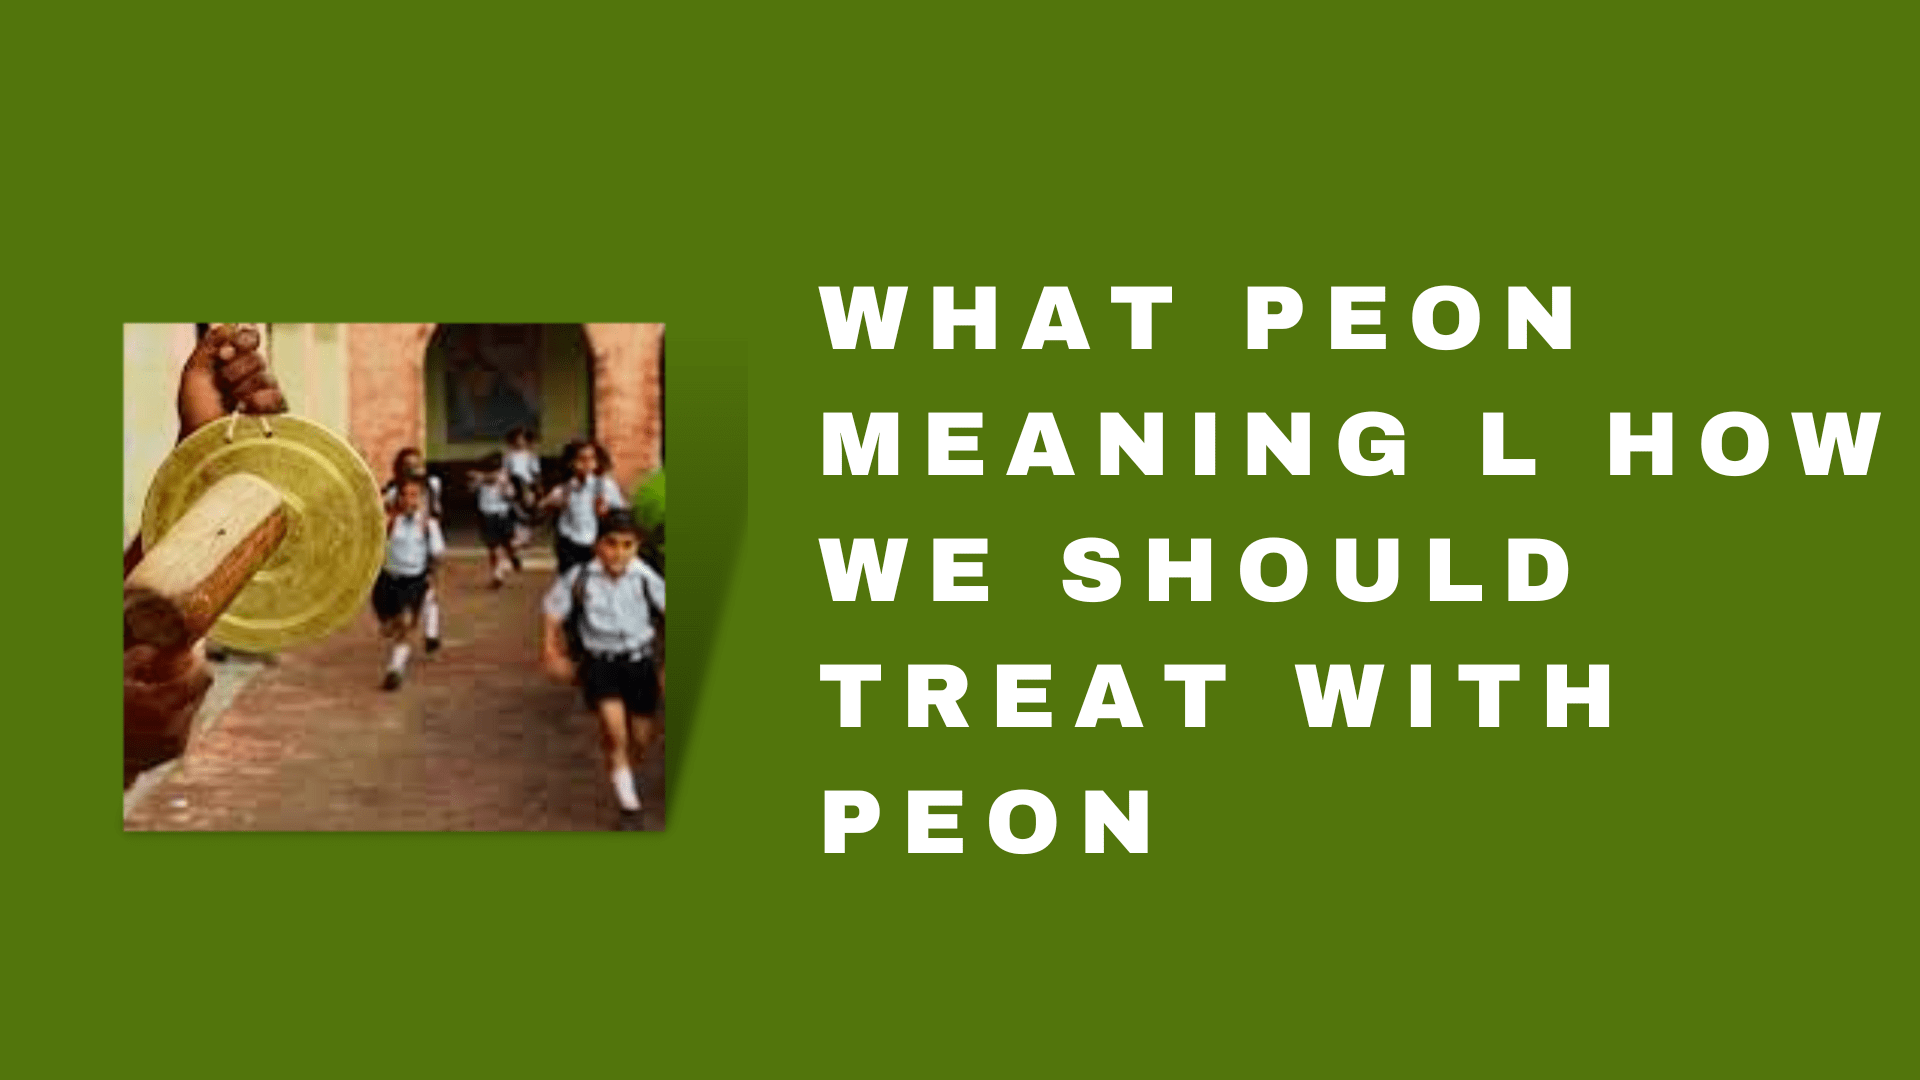 What Peon Meaning l How We Should Treat With Peon